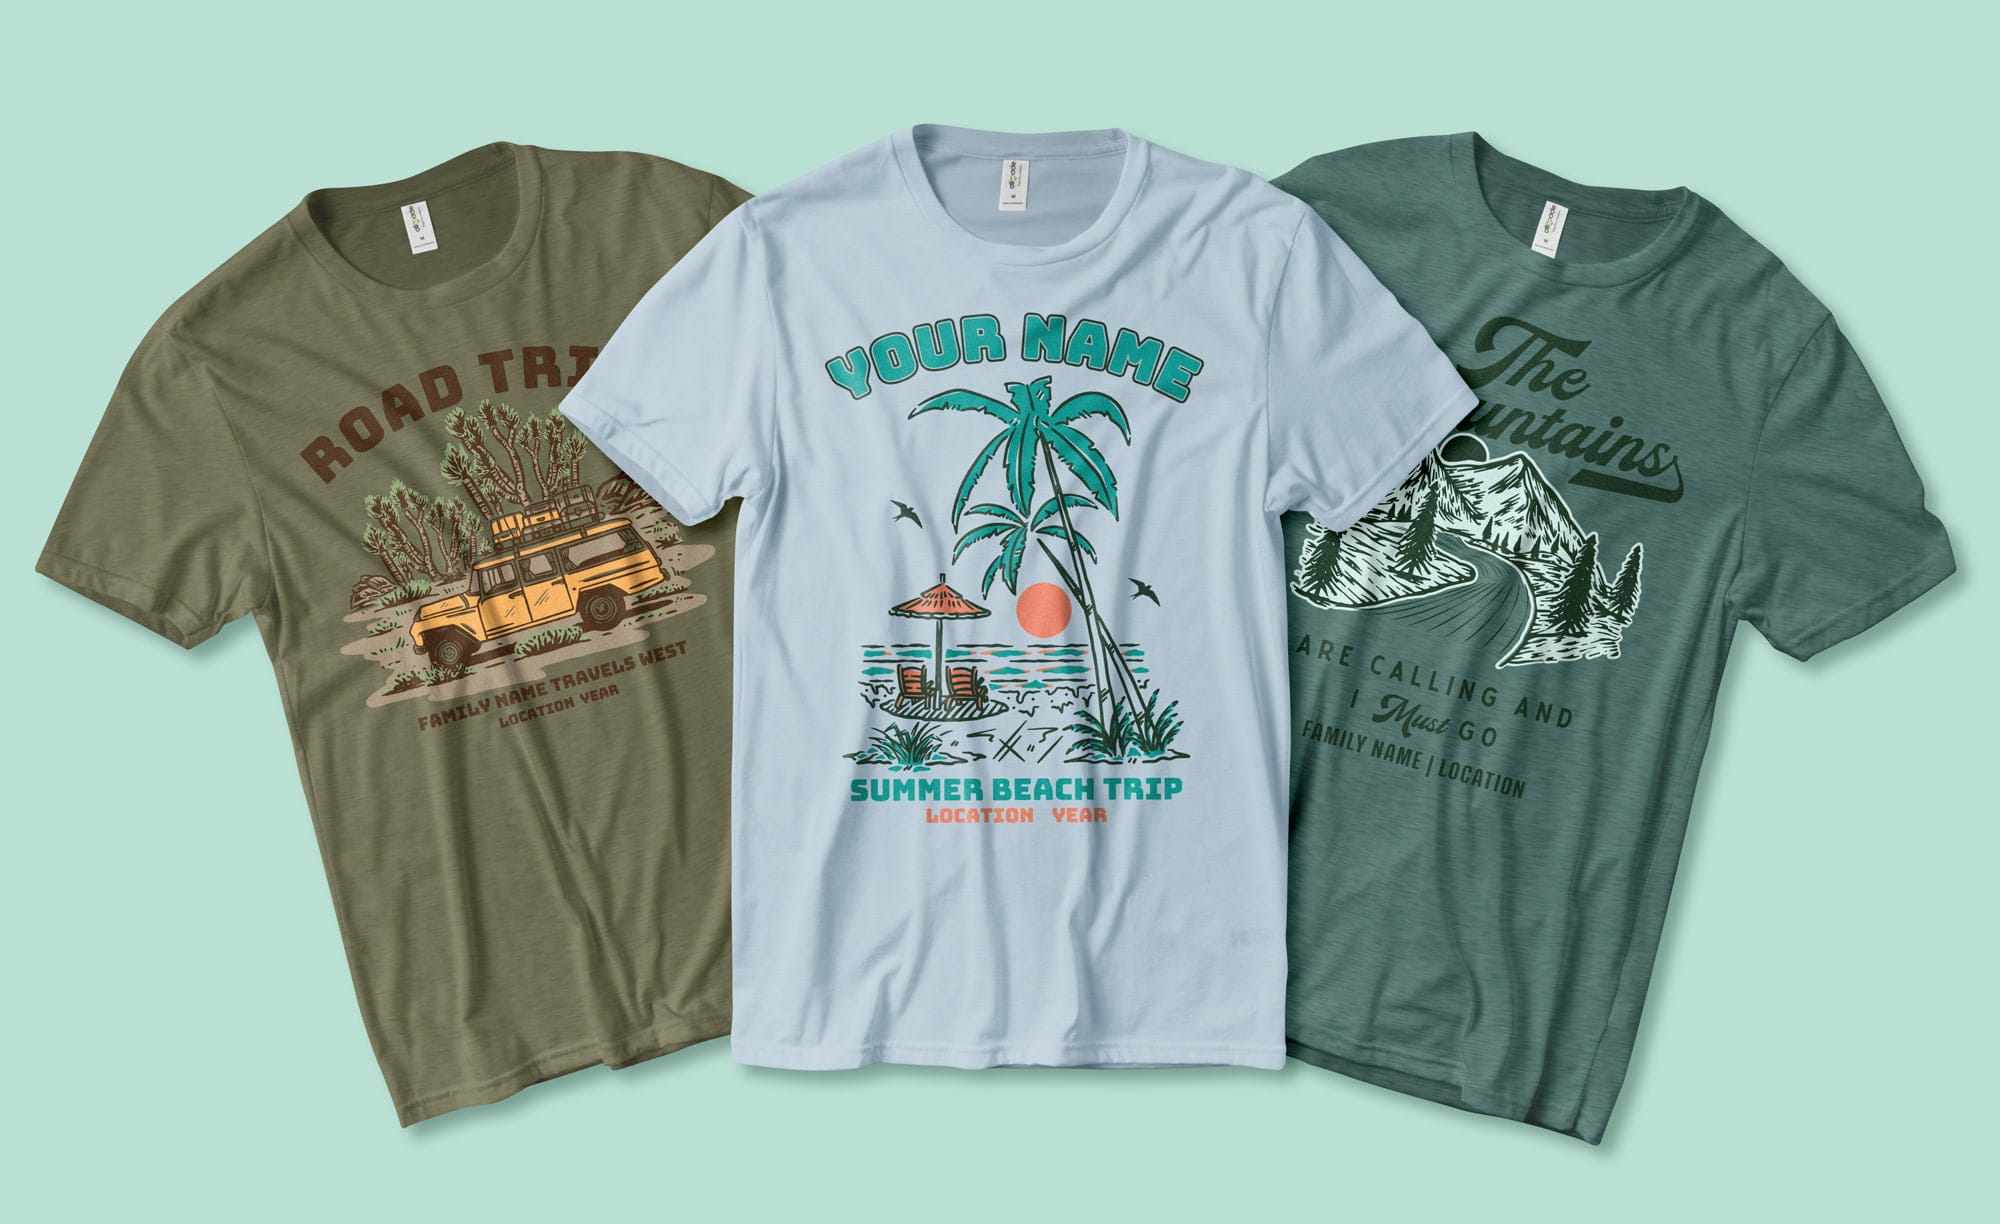 Flatlay showing three different color options for the Allmade Triblend tee. Each shirt shows a nature inspired design.